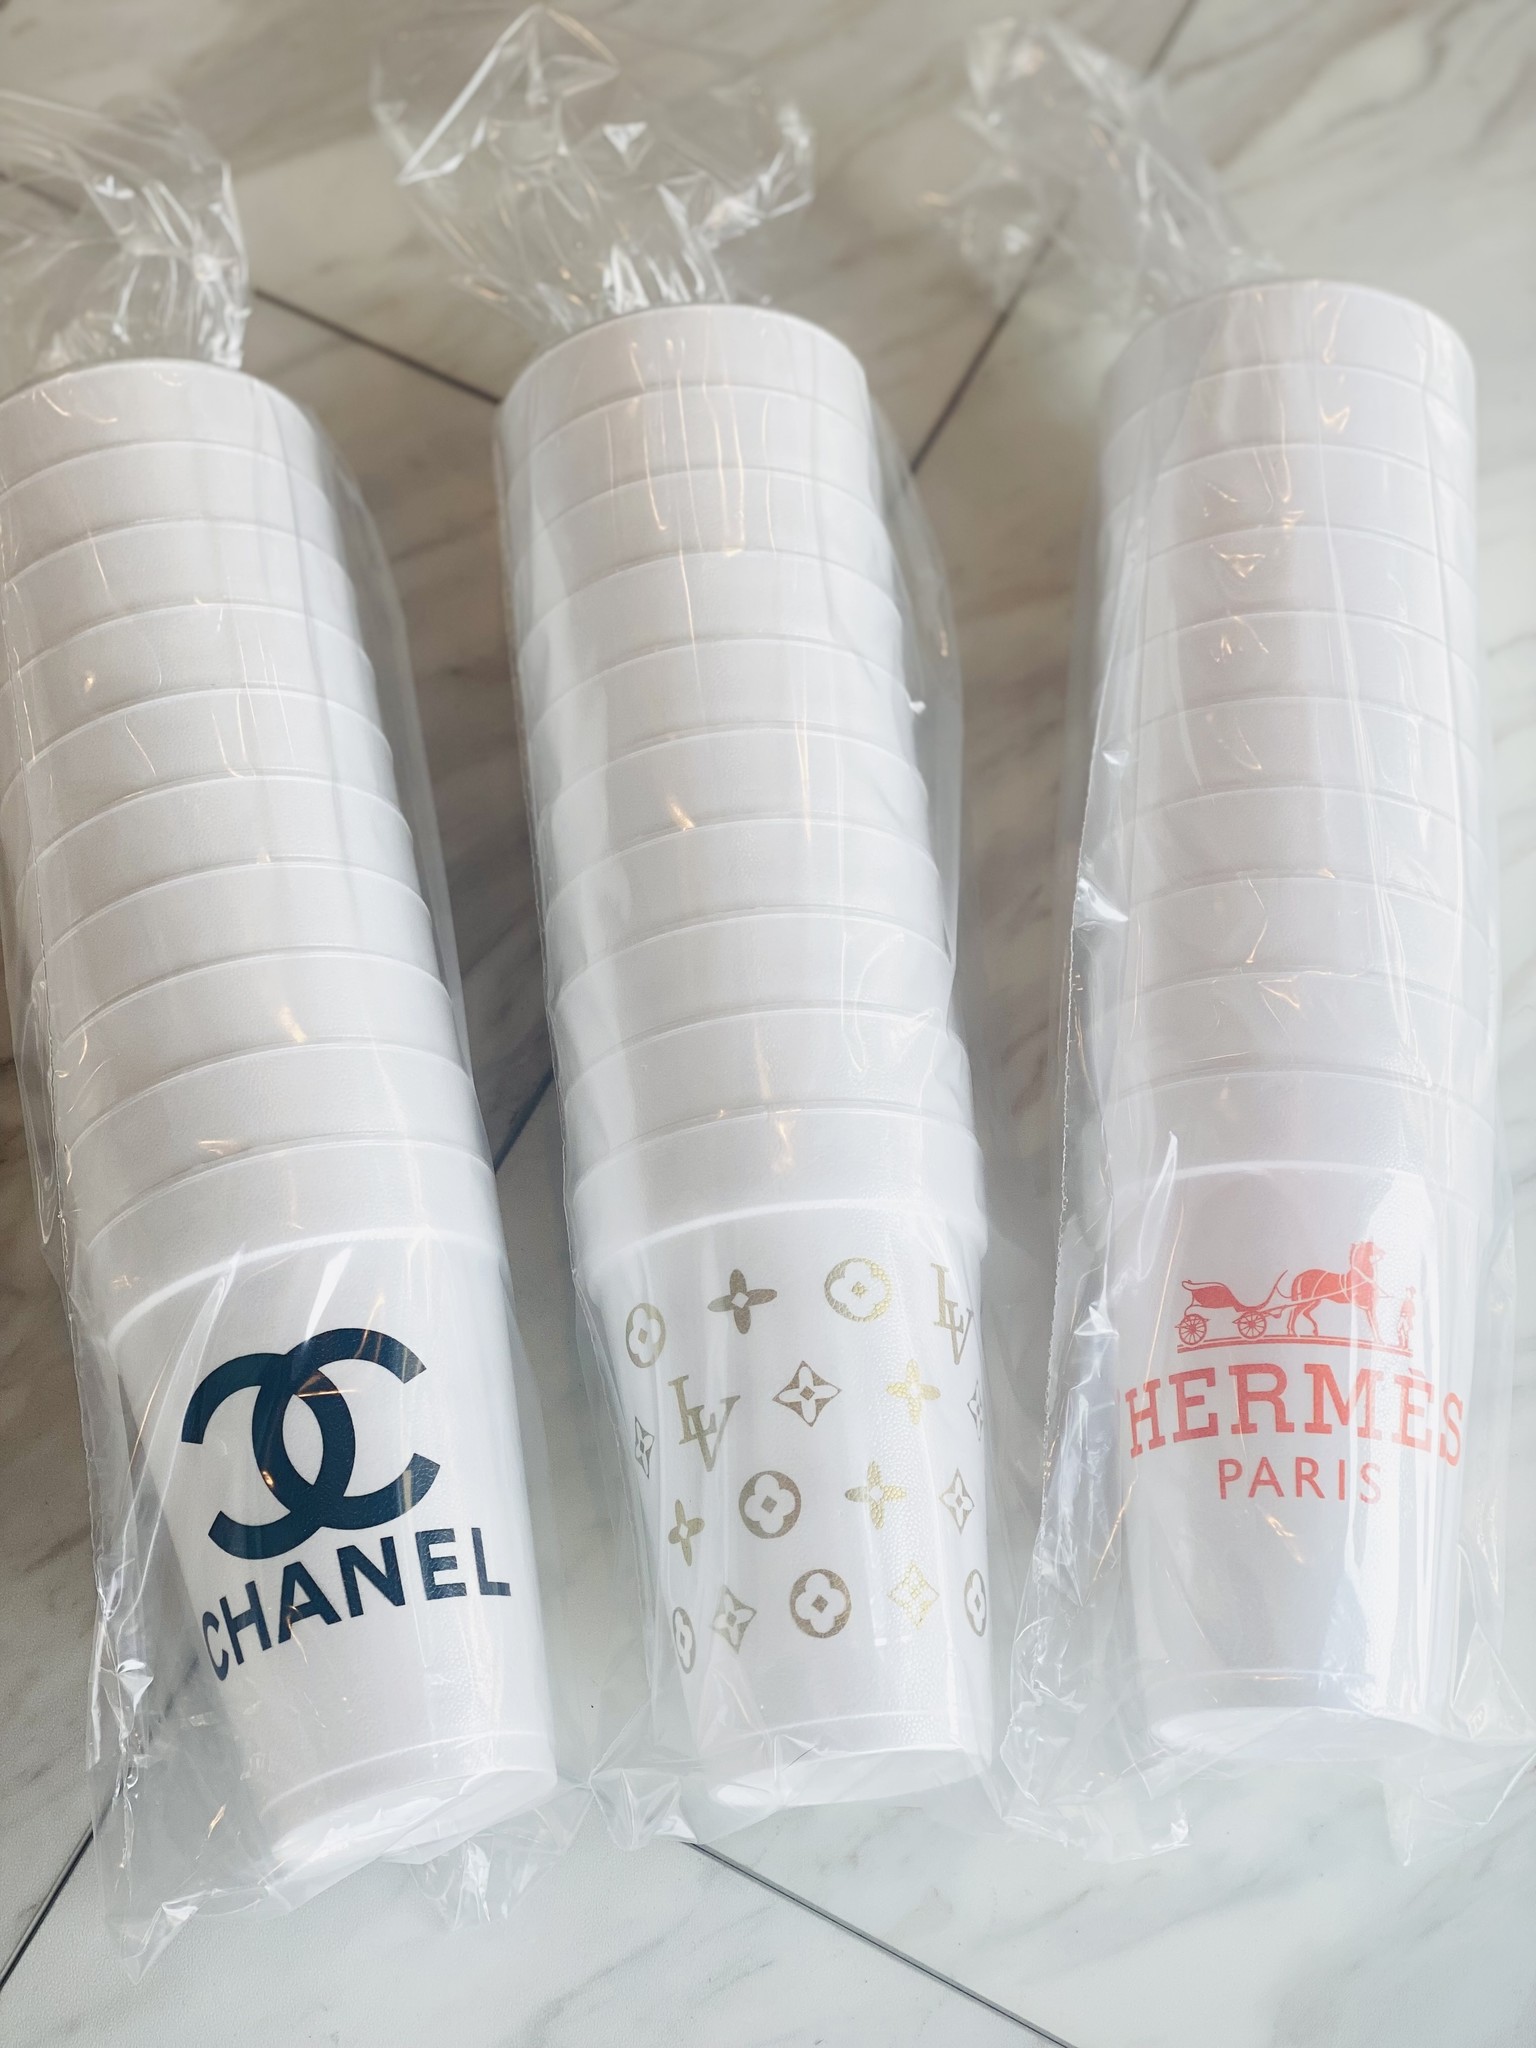 LV 16oz Styrofoam Cups - Rags and Riches Lifestyle Boutique